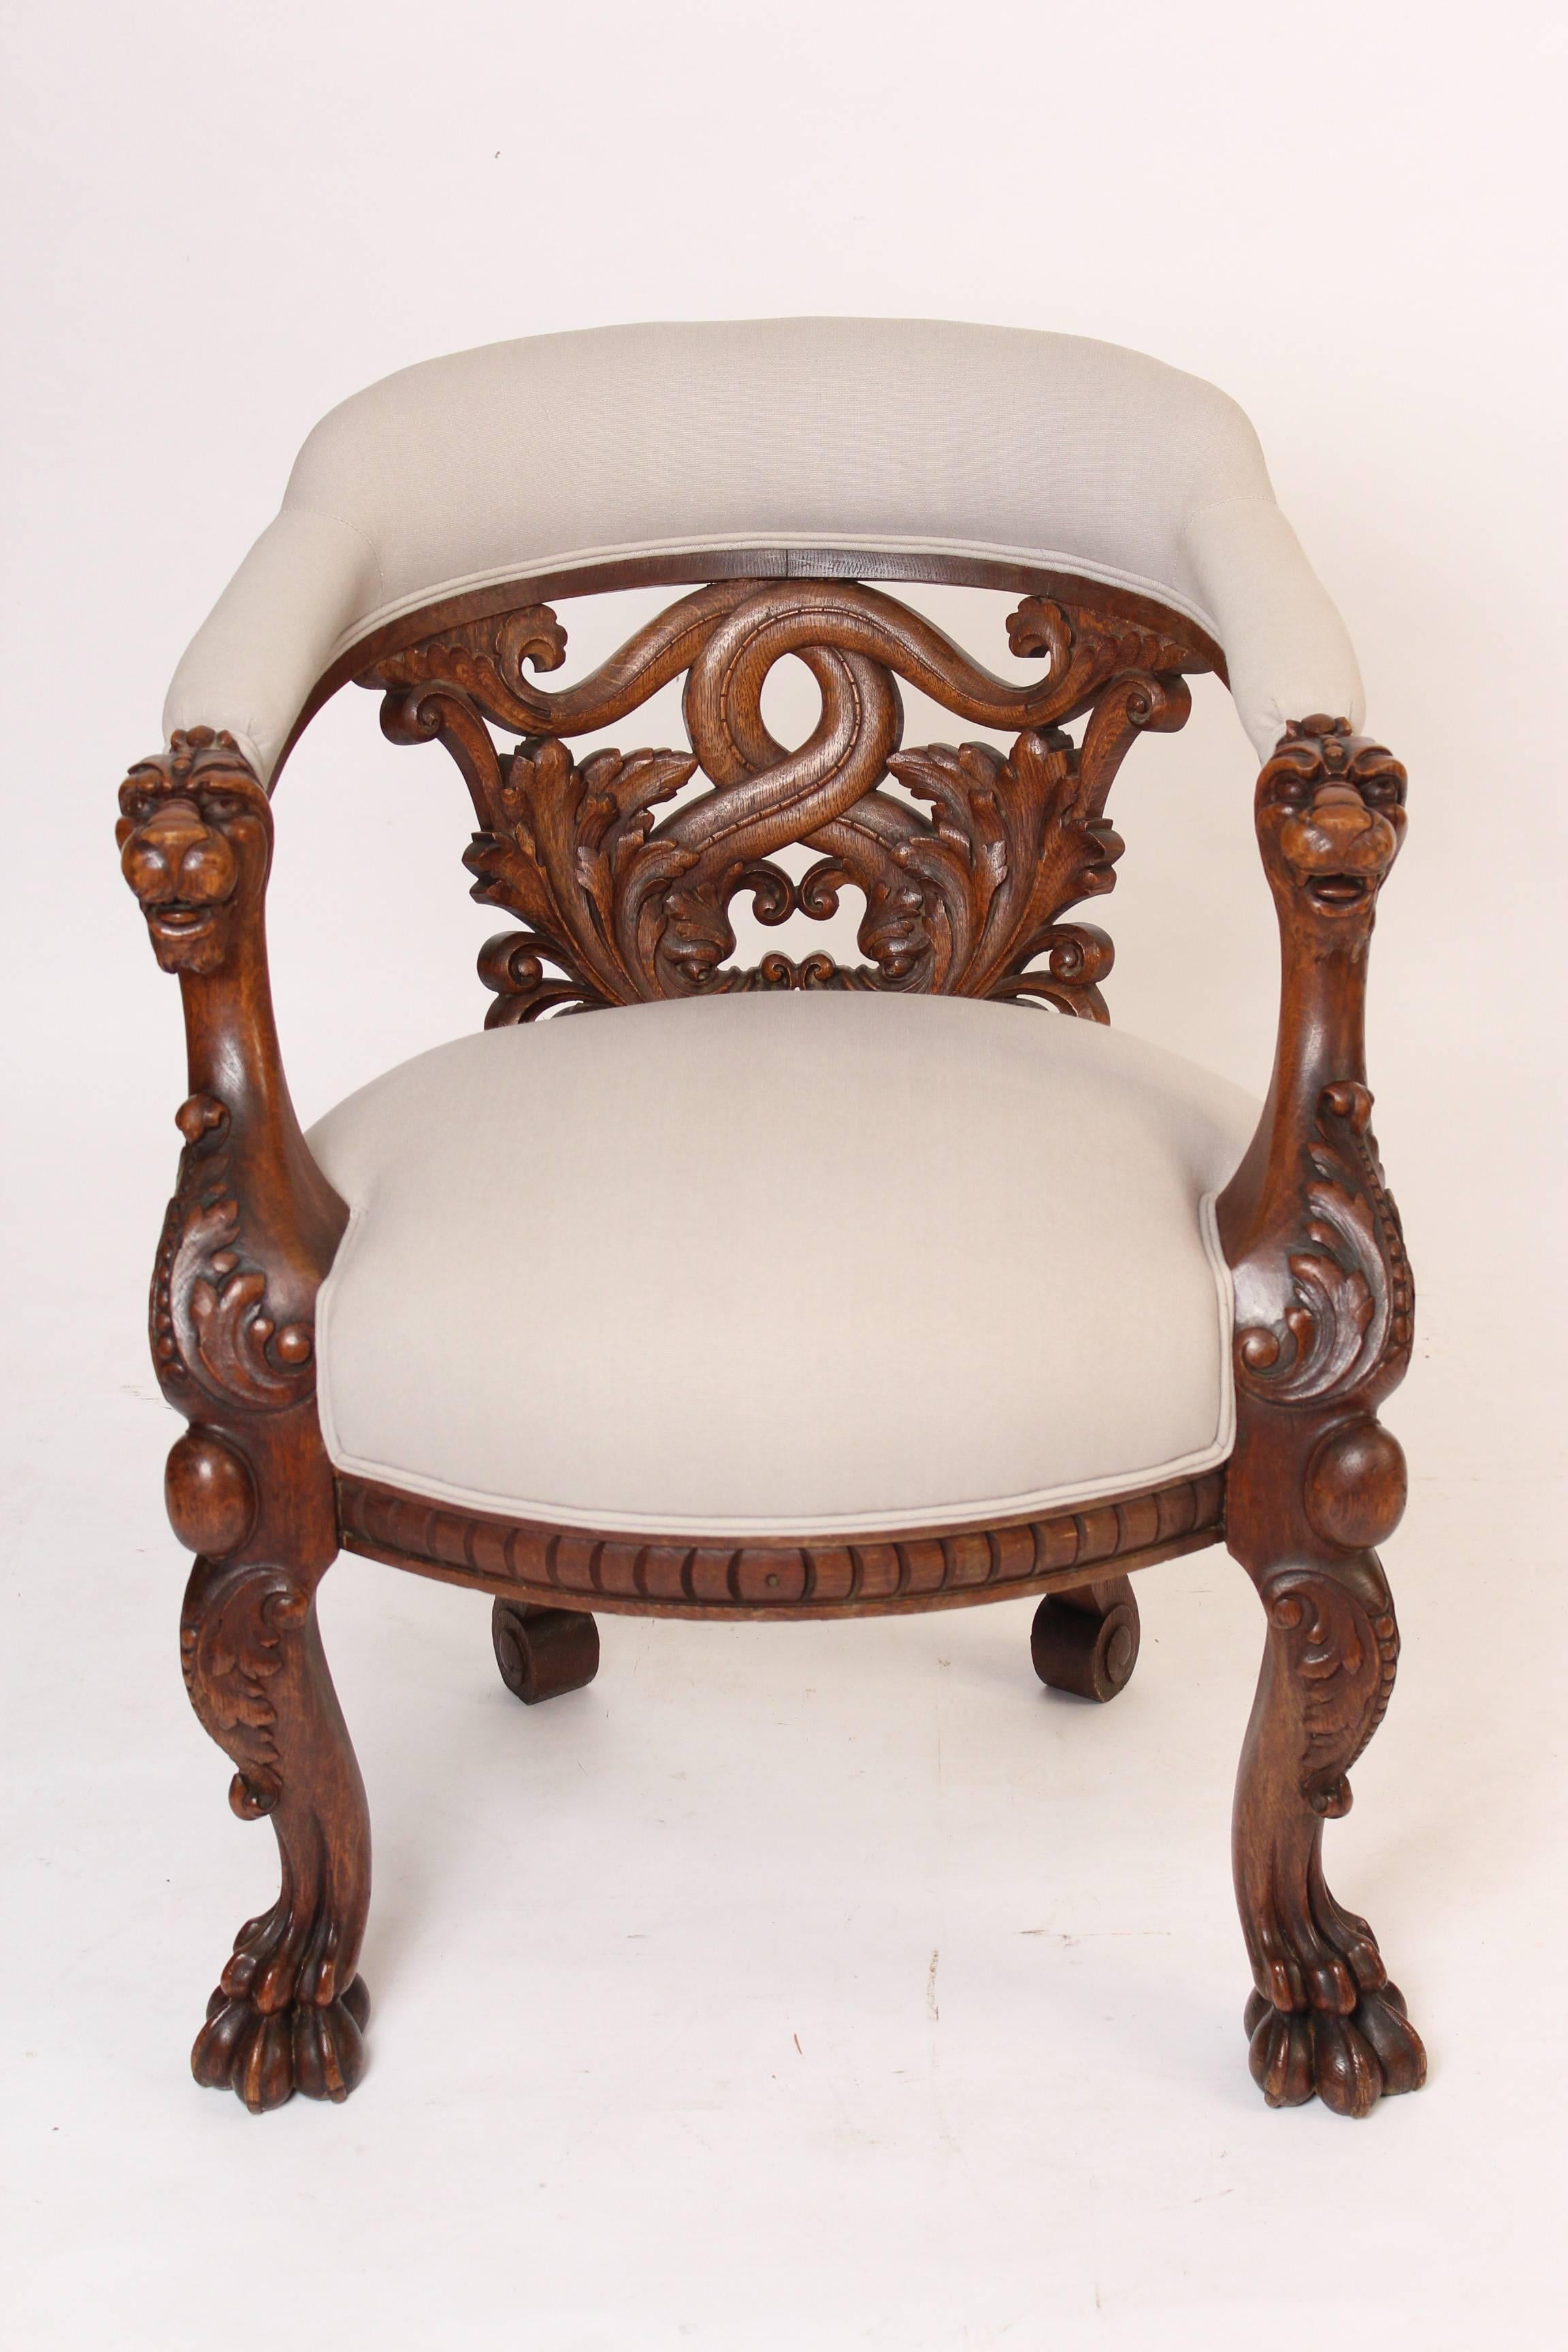 Roux and company barrel back carved oak armchair with foliate carved intertwined back, carved animal form arm terminals and paw feet, circa 1880. Label on bottom of chair reads, Roux and Company, corner 5th Avenue & 20th street, etc. We had this